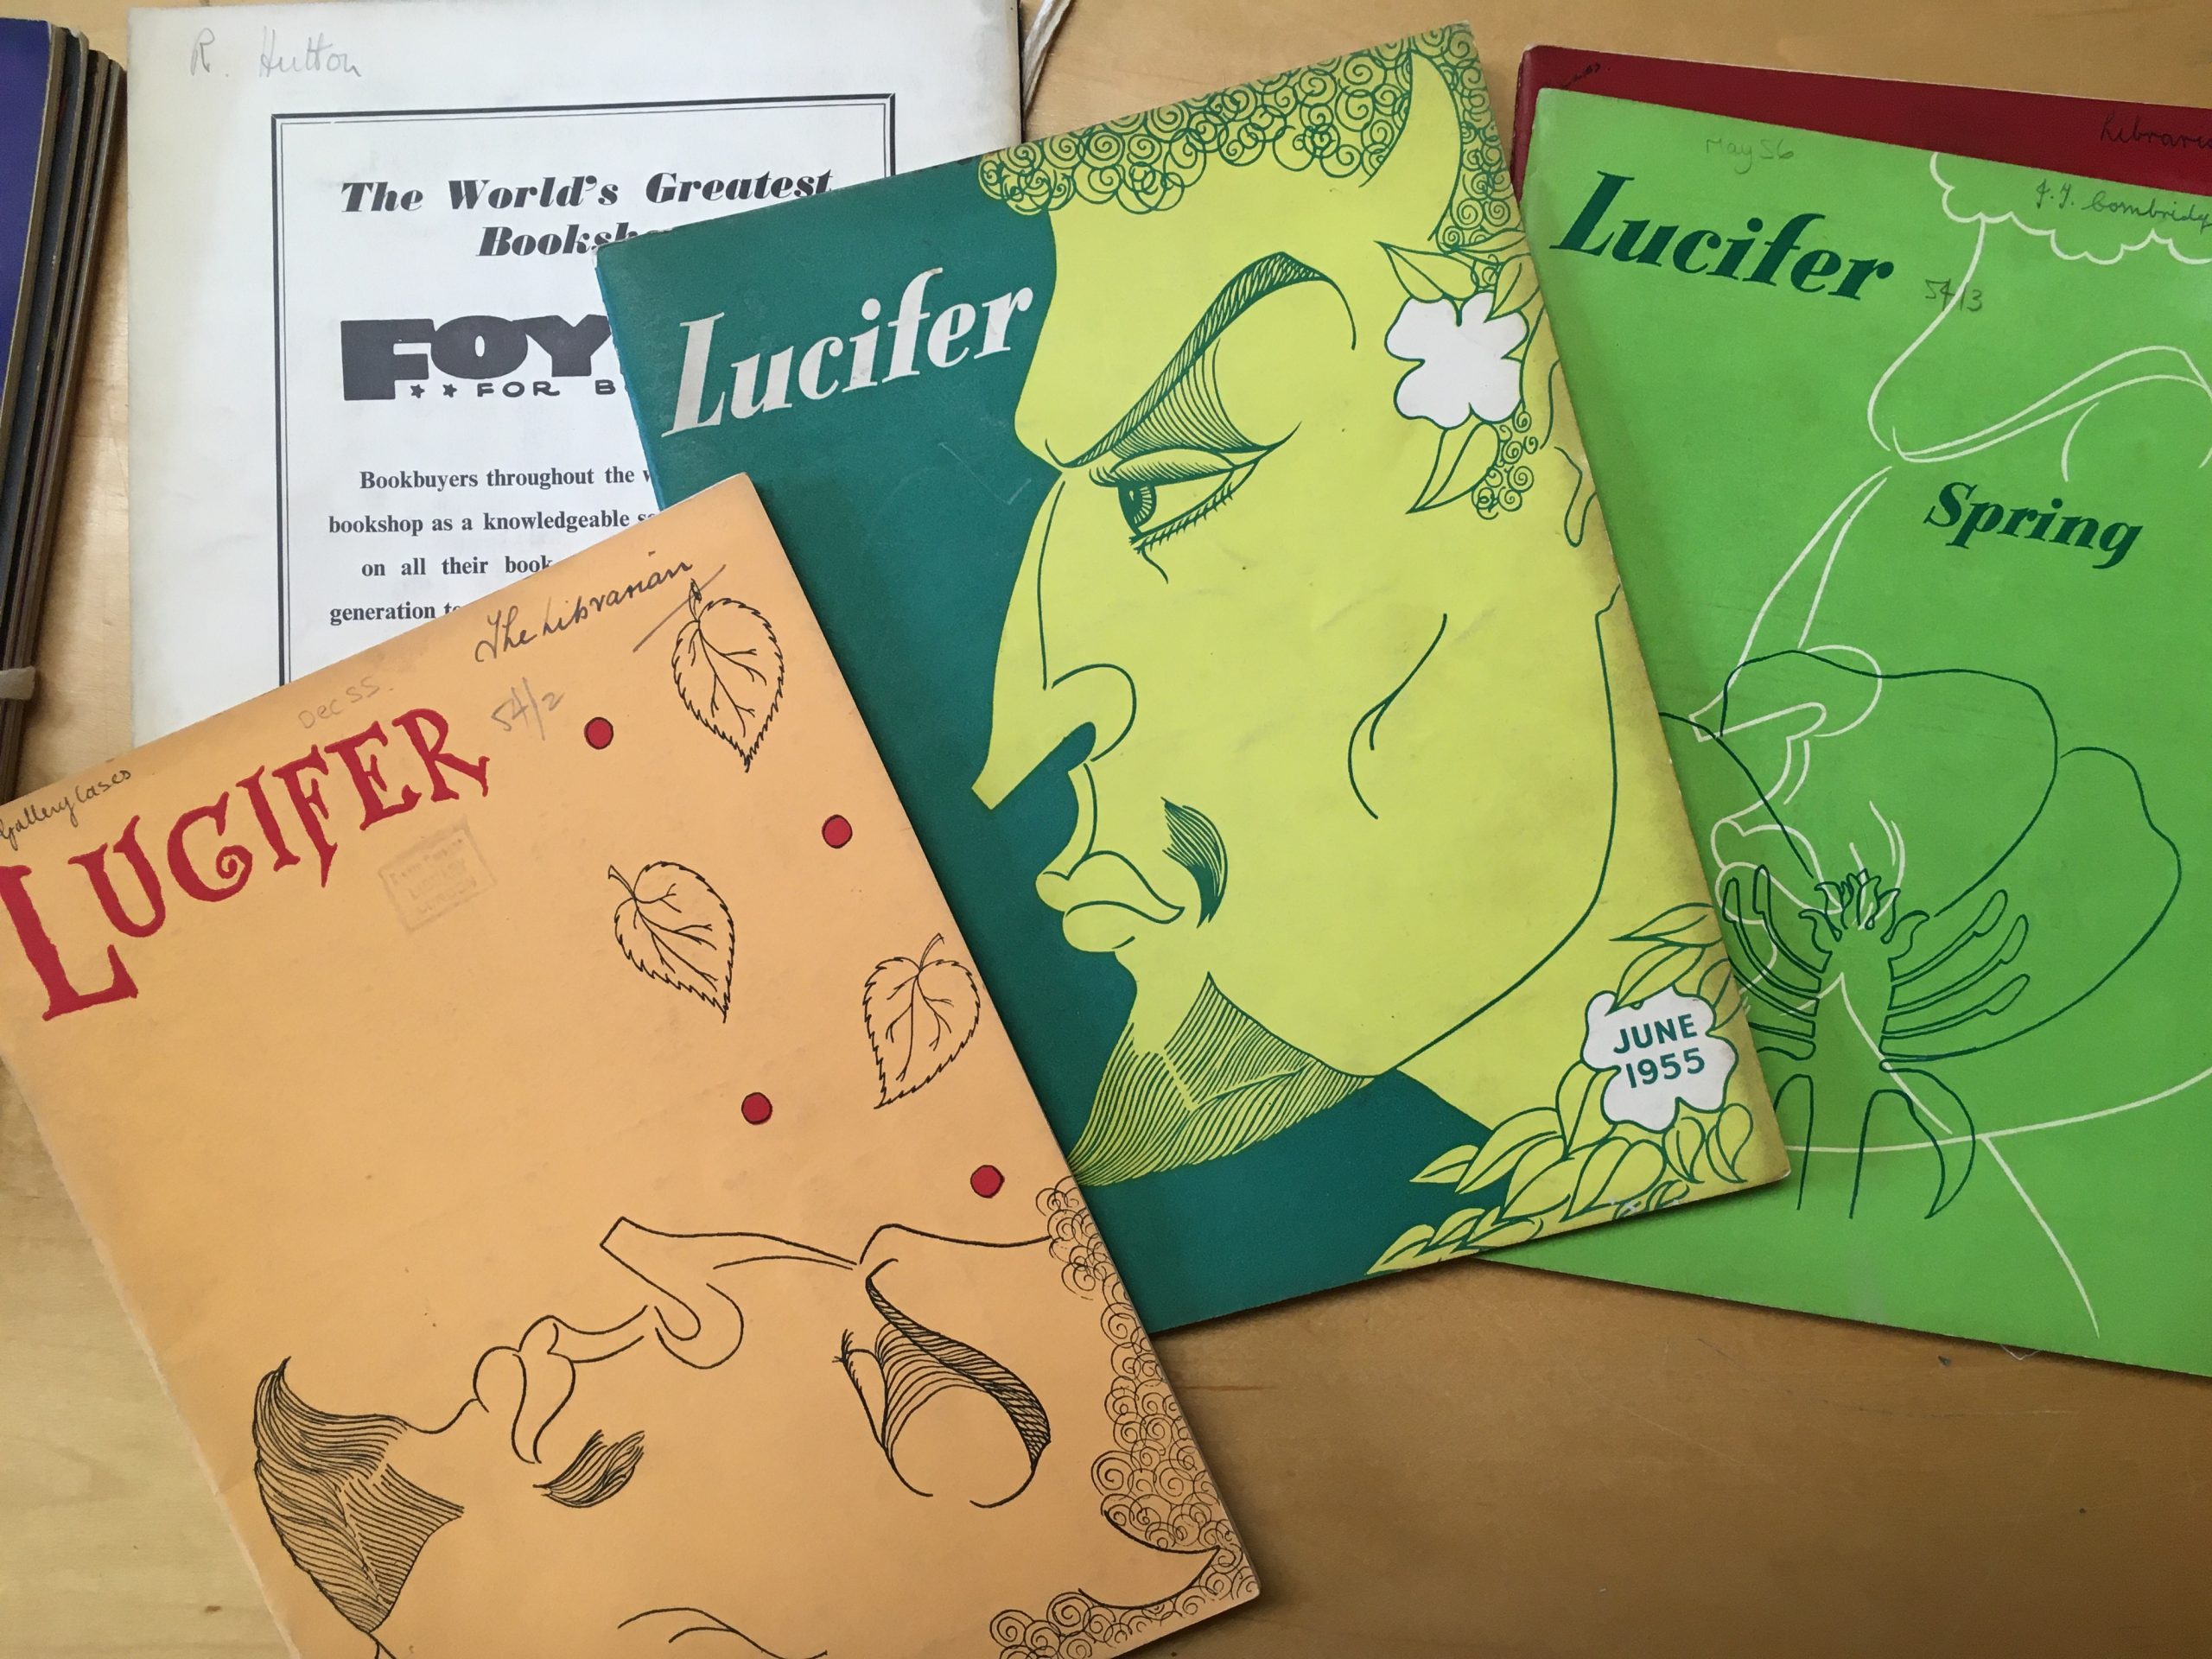 Copies of Lucifer, December 1955, June 1955, May 1956. Held at King's College London Archives, K/SER1/63.